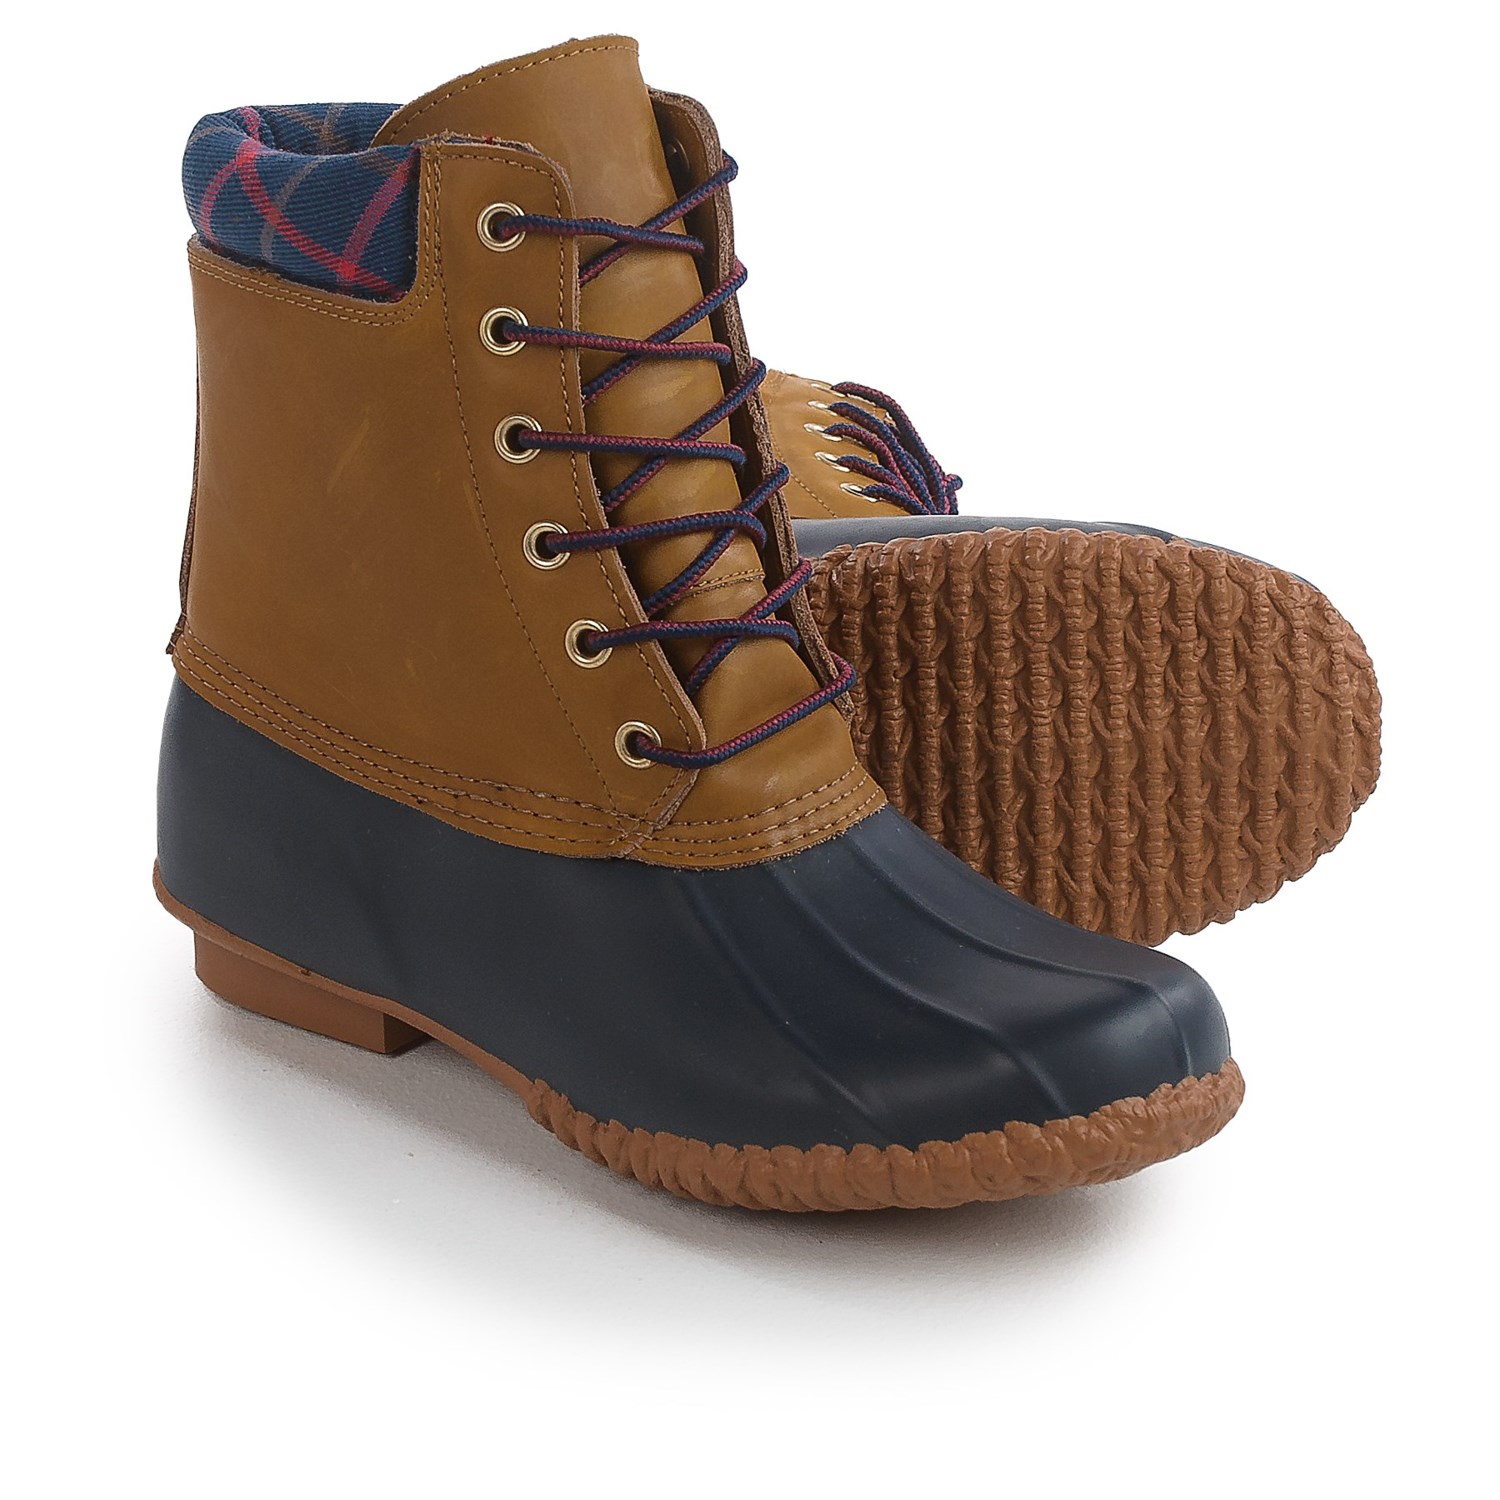 Cougar Roger Duck Pac Boots (For Women) - Save 77%